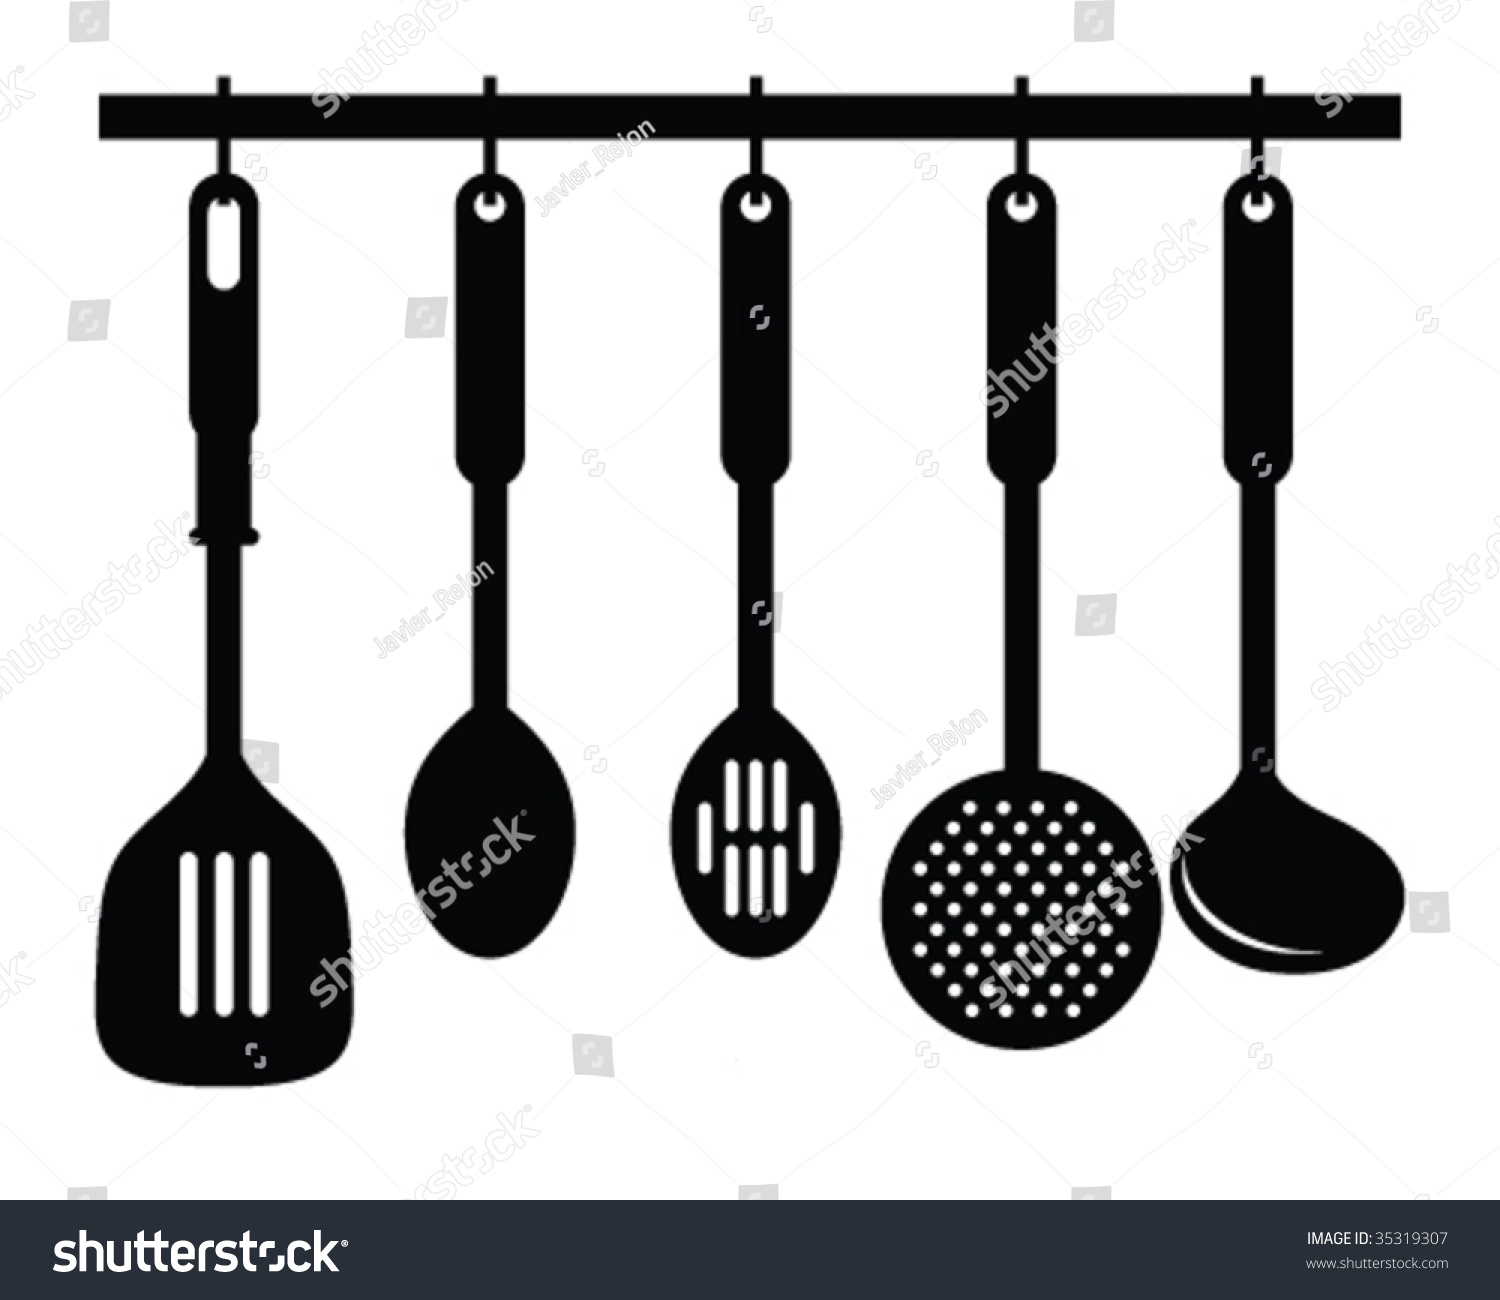 clipart of kitchen tools - photo #44